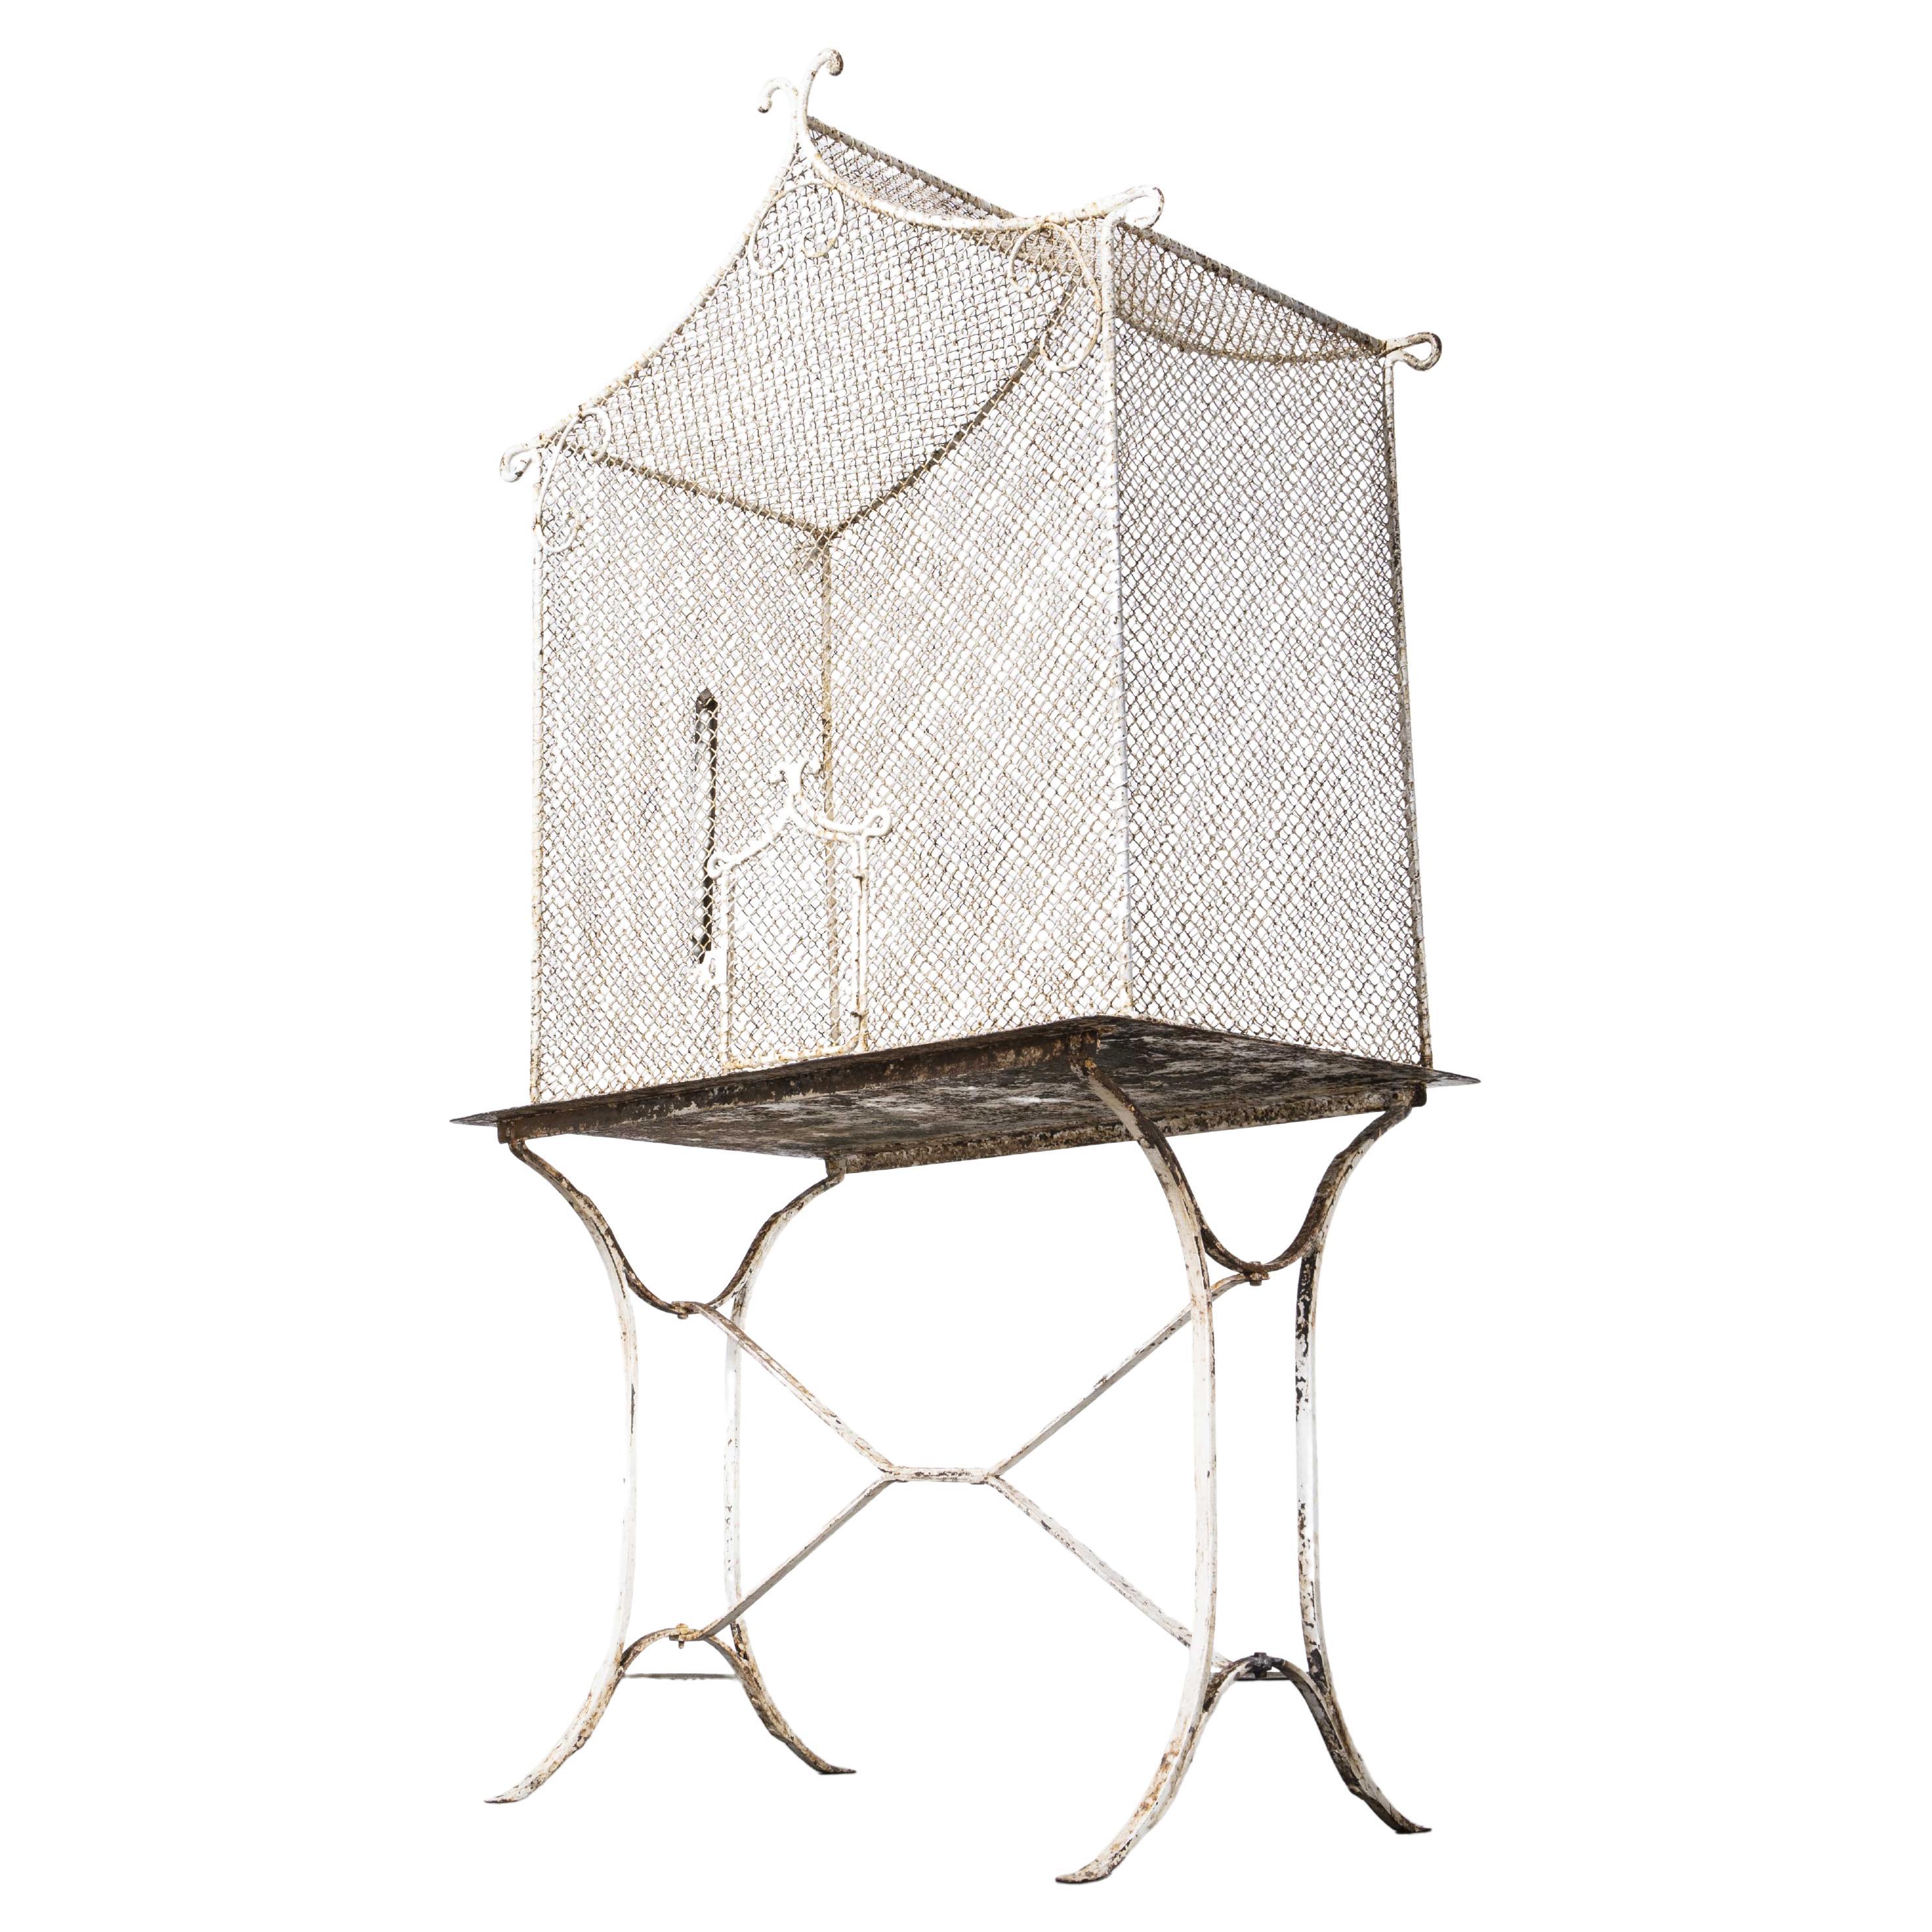 1920's Large French Mesh Steel Aviary on Original Table